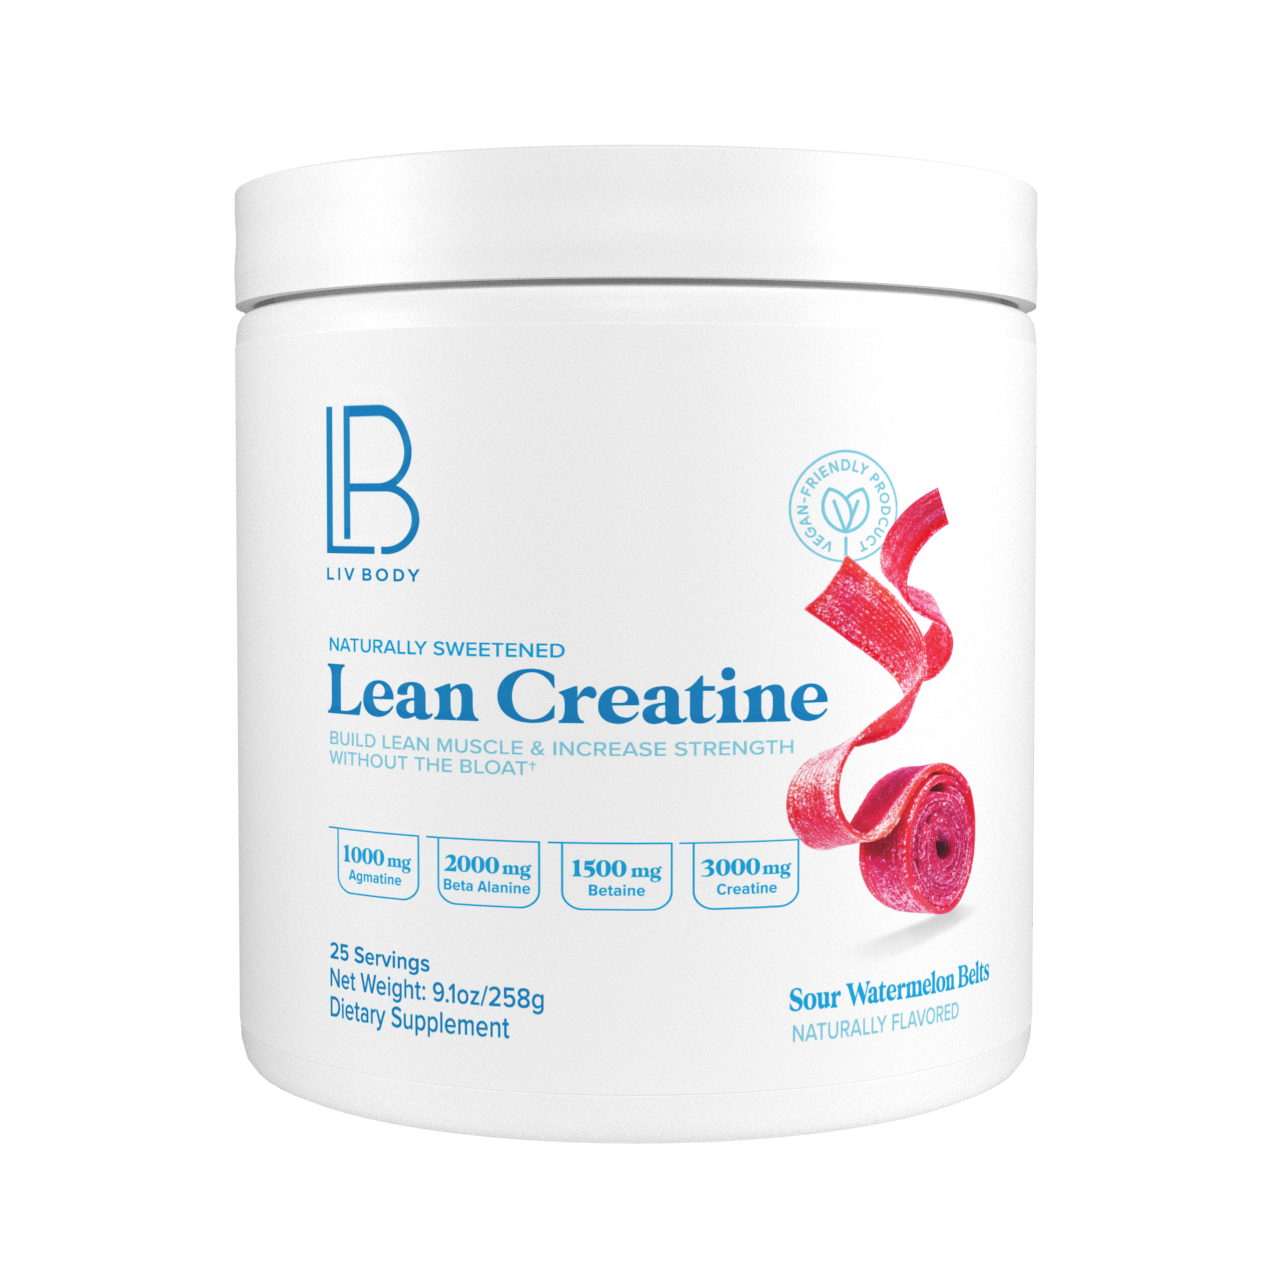 Illustration of the LIV lean creatine supplement used in working out and getting lean muscle.